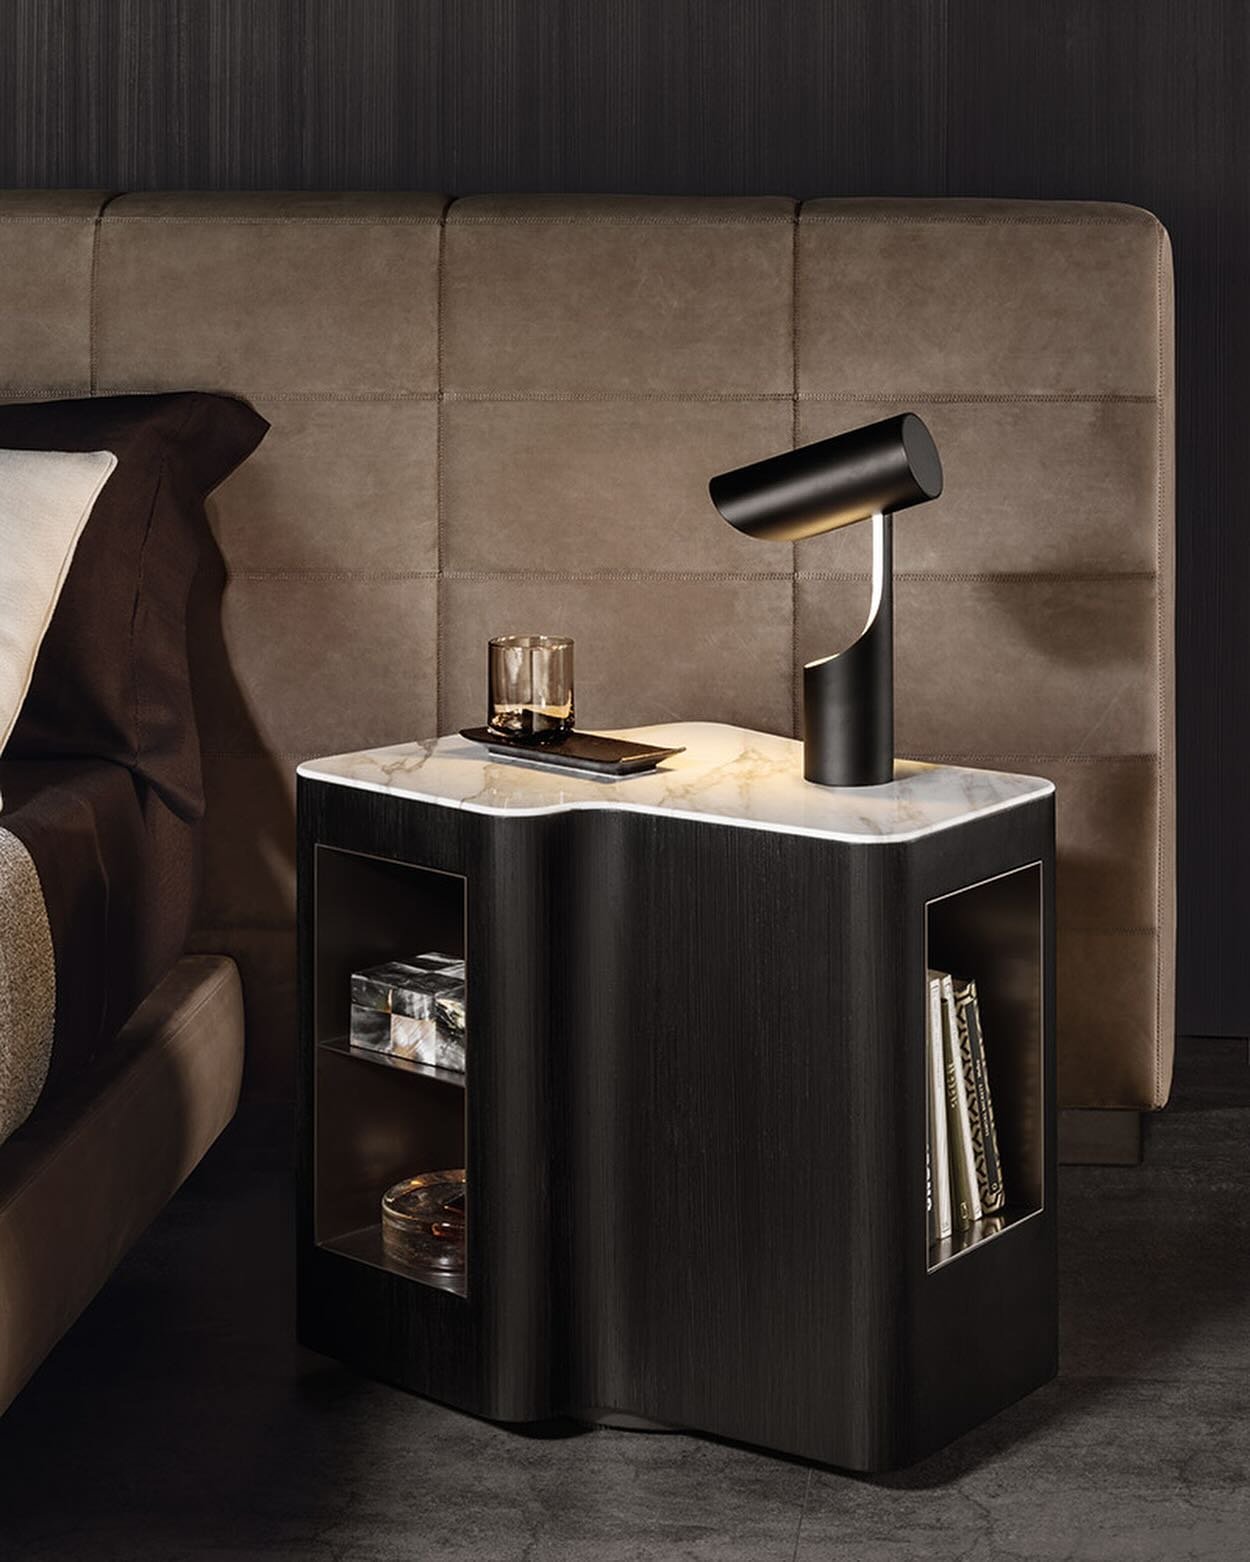 Minotti&rsquo;s &lsquo;Lou Nightstand&rsquo; that beckons relaxation as much as your bed does. With an inviting design and convenient functionality, the &lsquo;Lou&rsquo; is the perfect bedside companion. ✨

Explore this collection at casaitaliaonlin